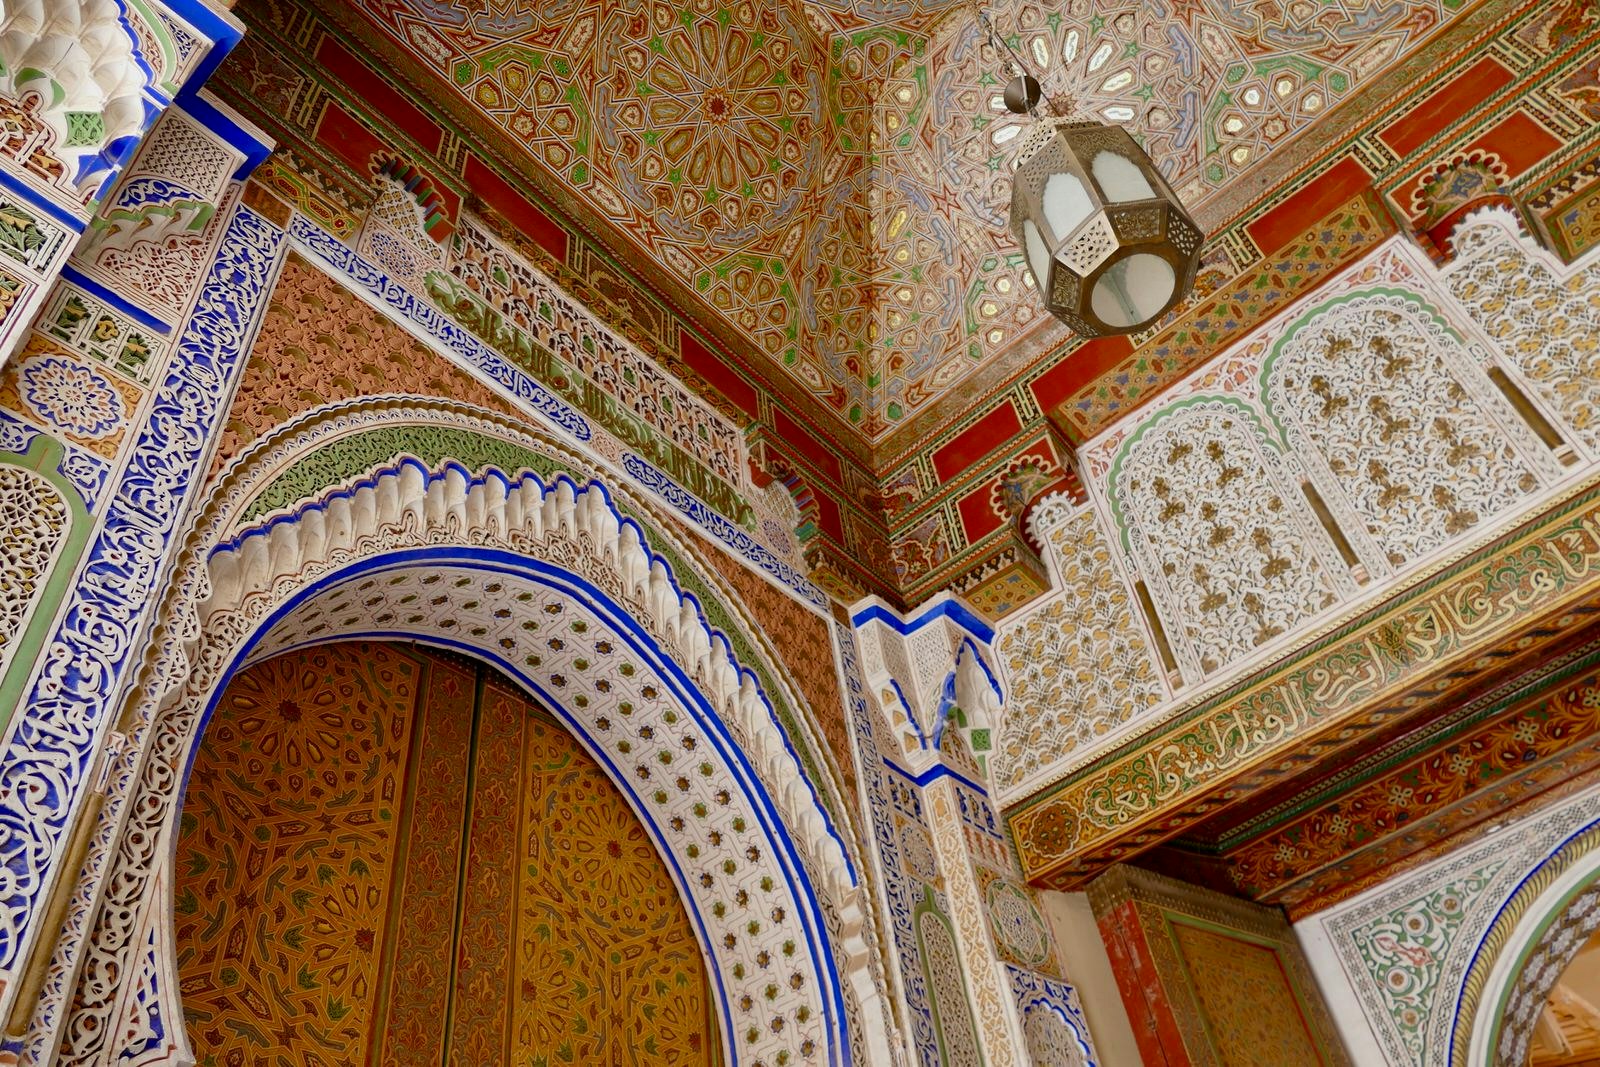 Recently restored painted wood and stucco work in Fez medina, Morocco